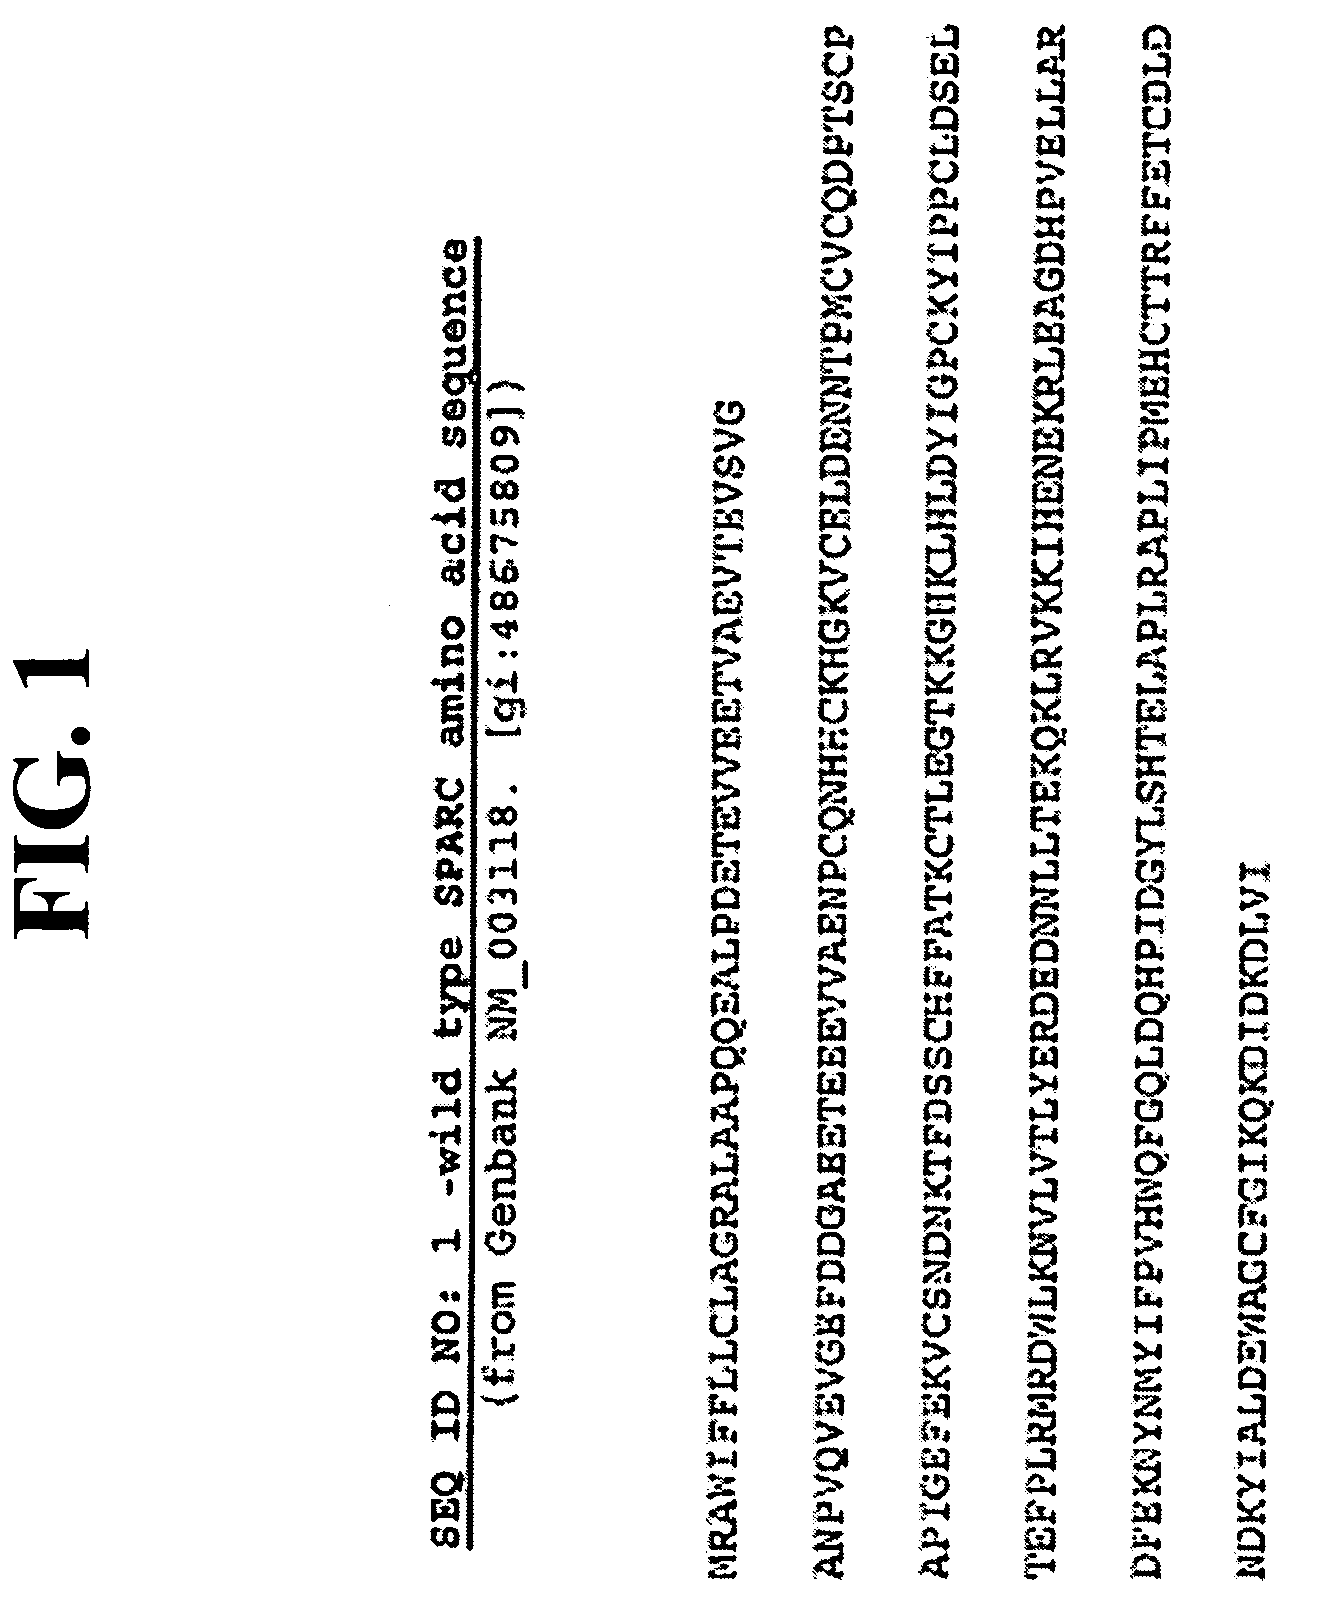 SPARC and methods of use thereof